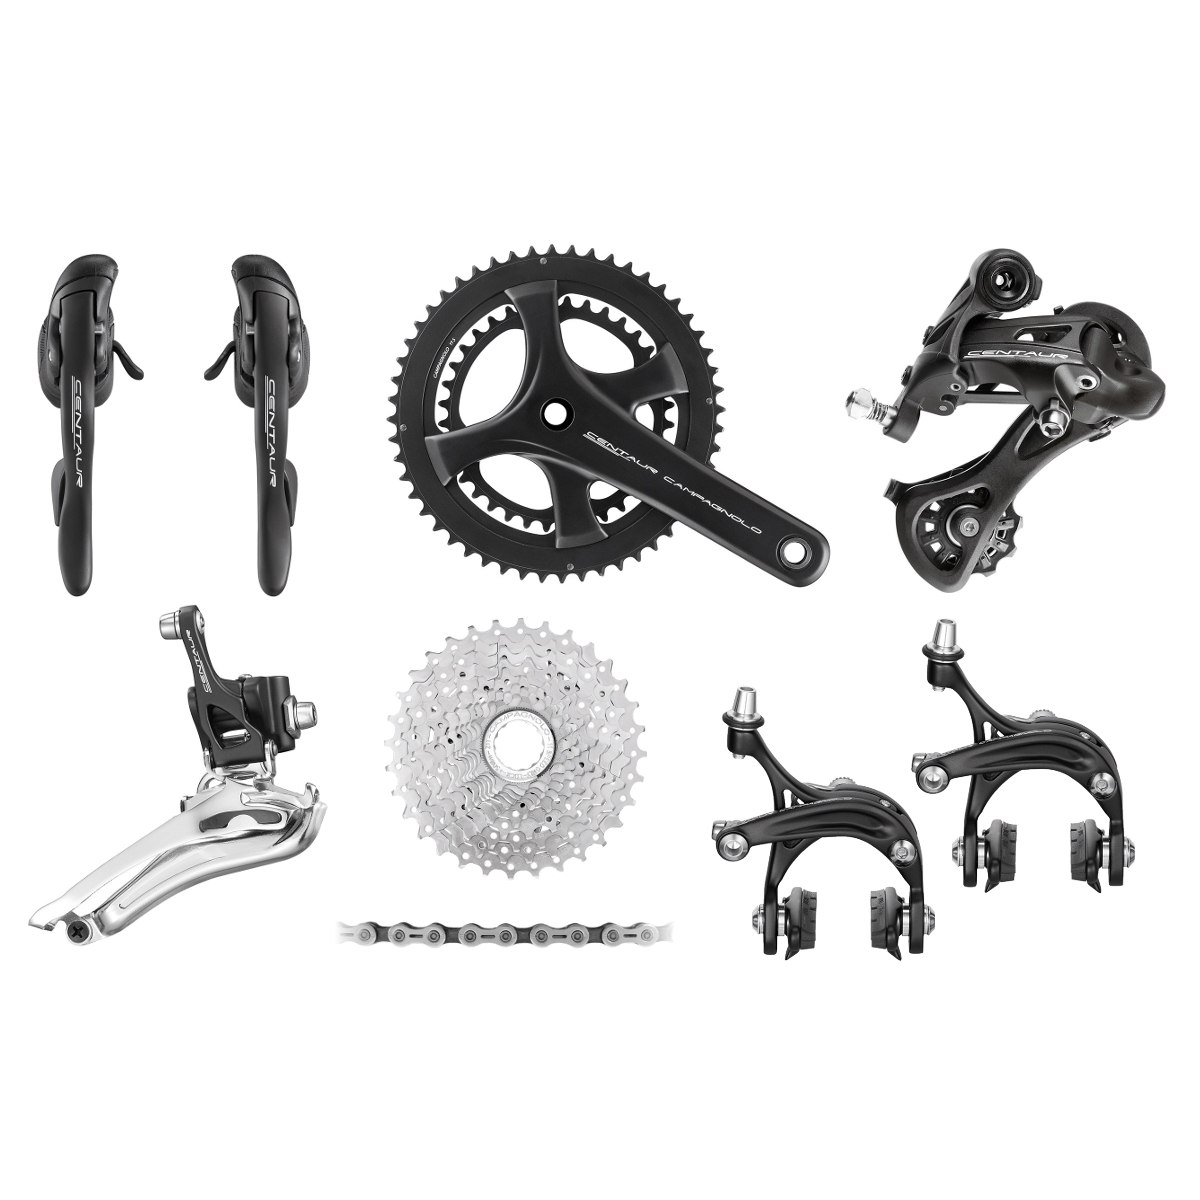 Picture of Campagnolo Centaur 11 Groupset 2x11 - black